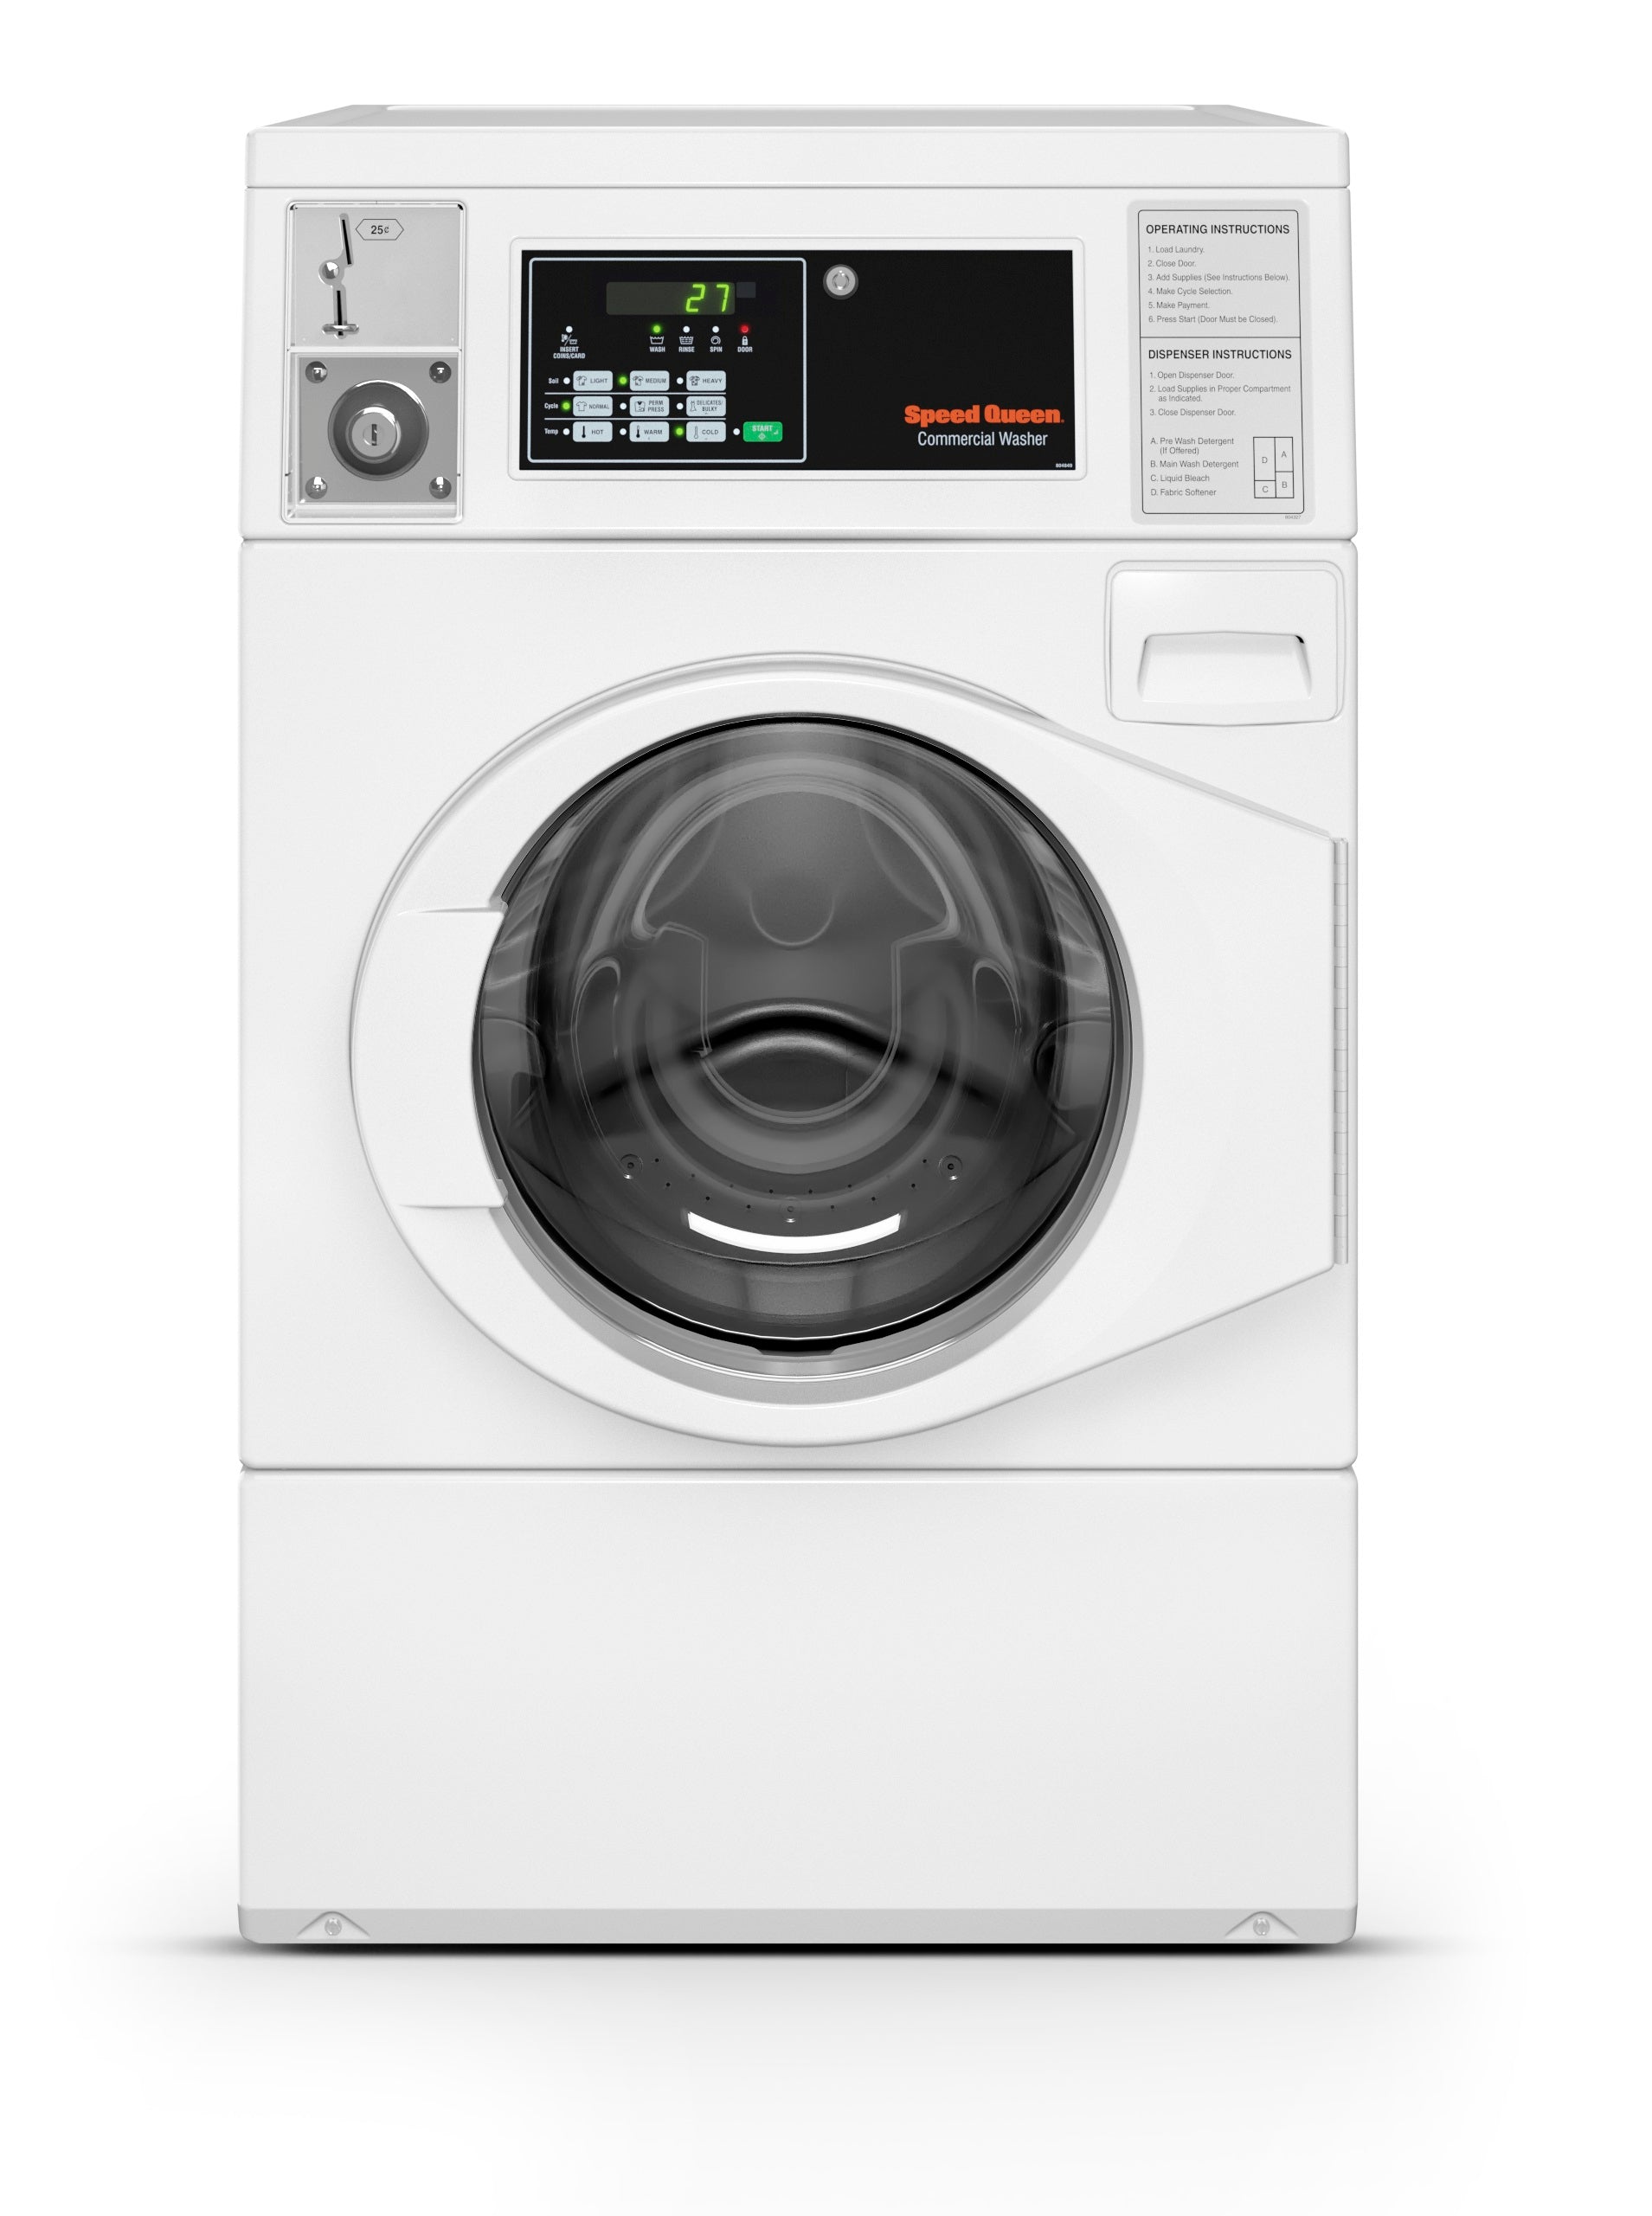 Whirlpool 27 Commercial Washer, Coin Equipped